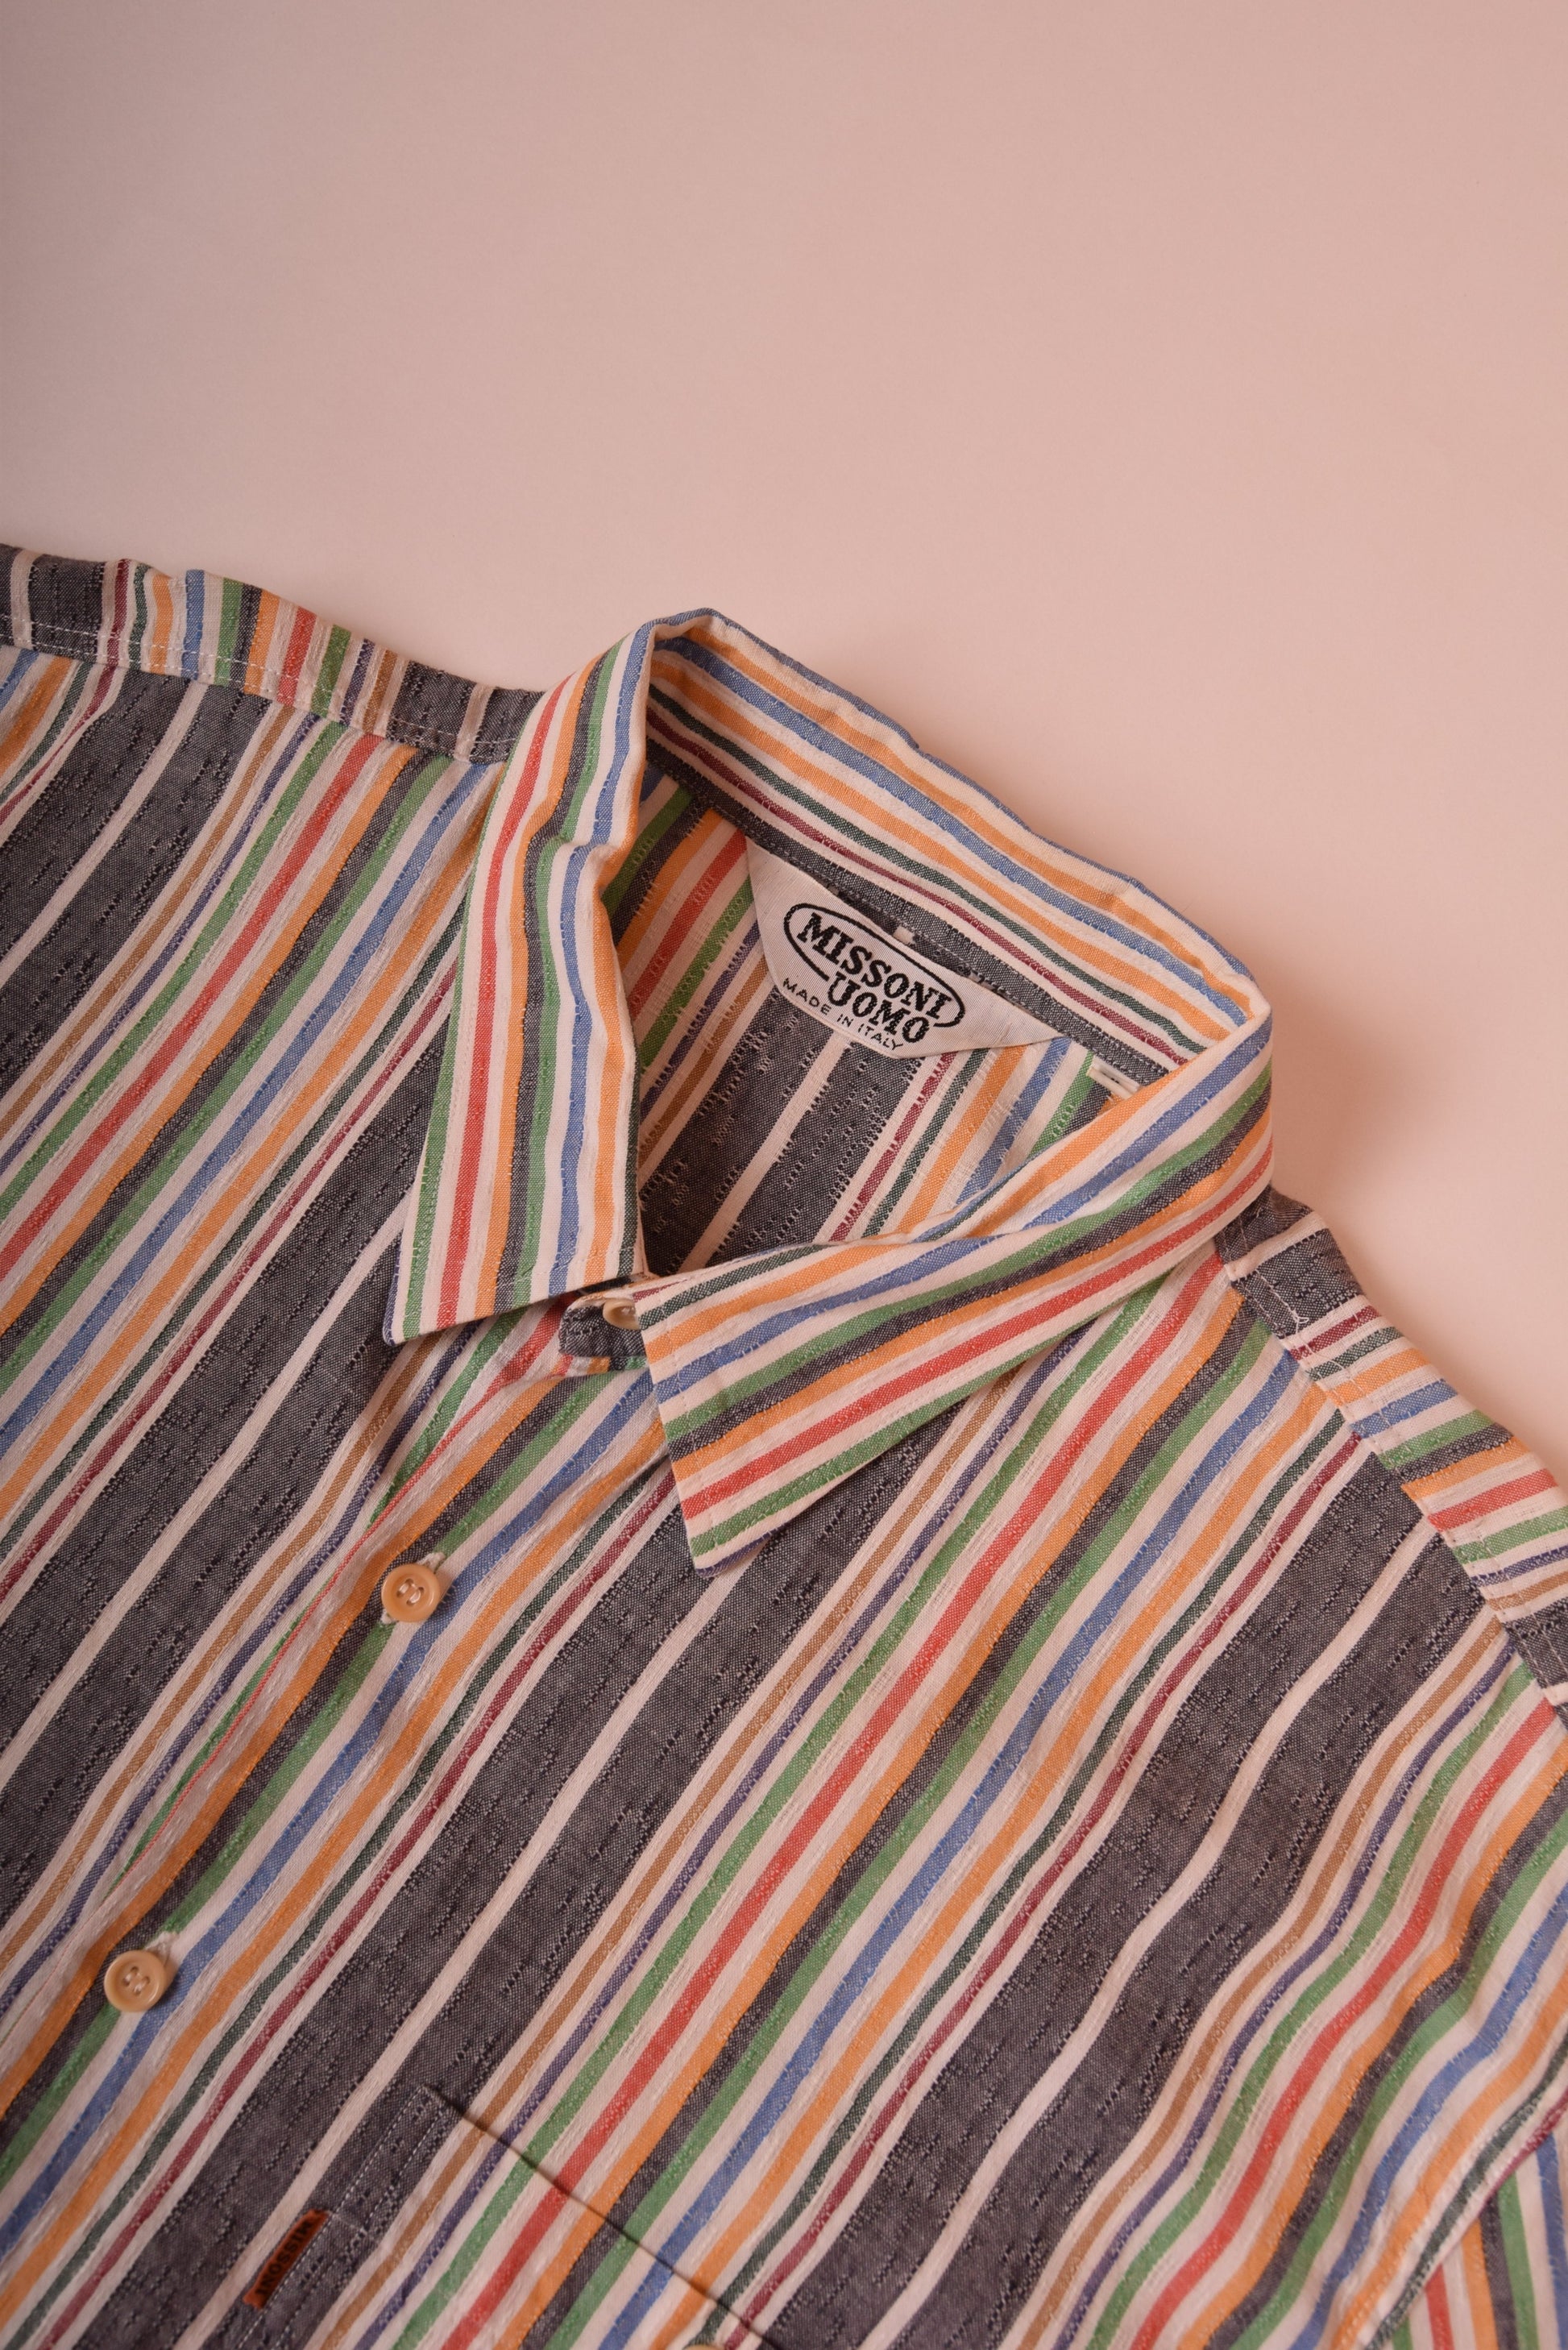 Vintage 90's Missoni Uomo Shirt Made in Italy Size XL Cotton